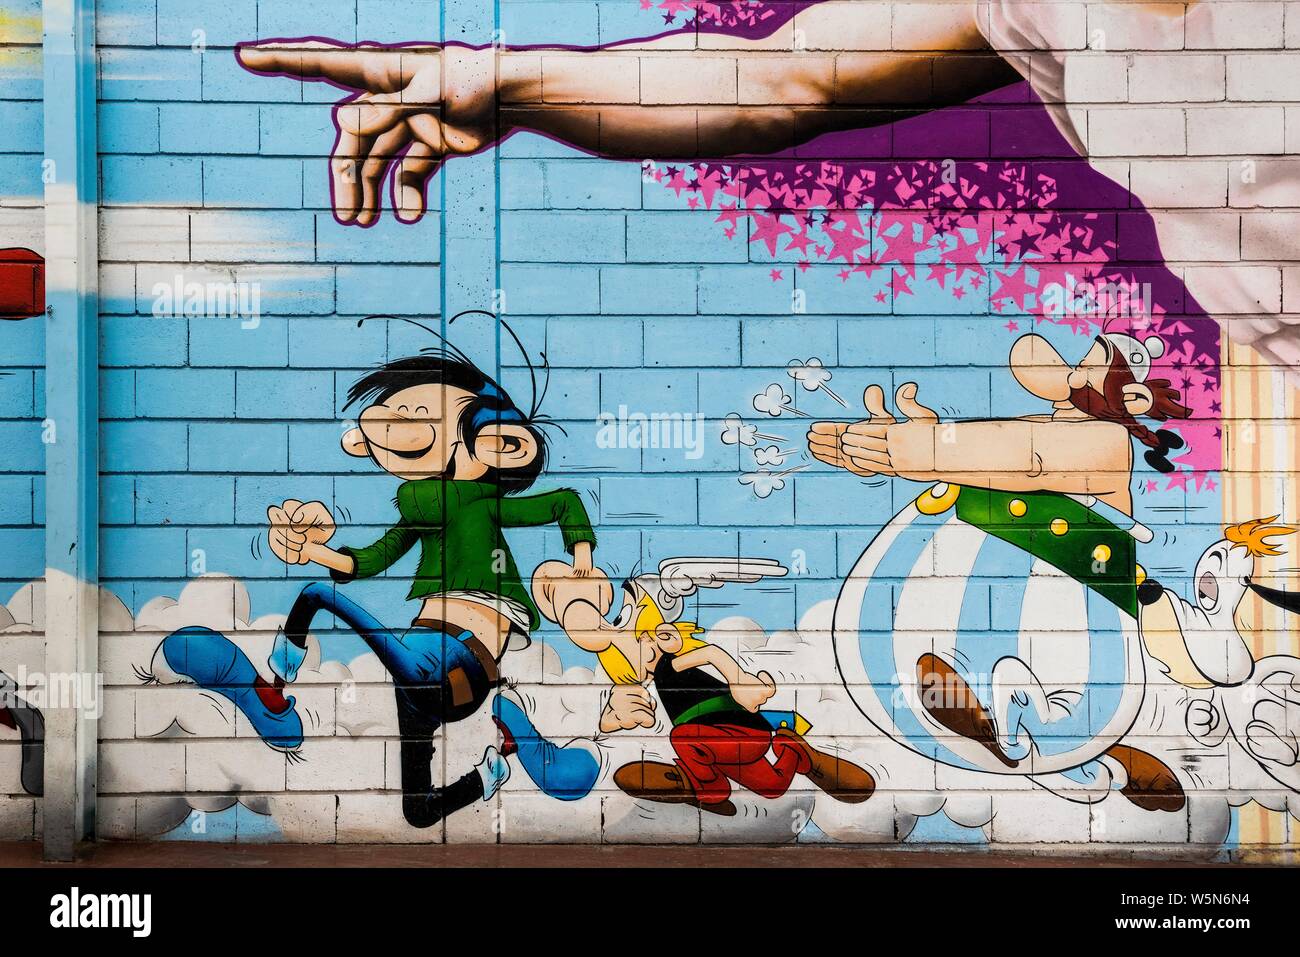 Painted house wall with cartoon characters, Asterix and Obelix, Graffiti, Porte de Clignancourt, Paris, France Stock Photo